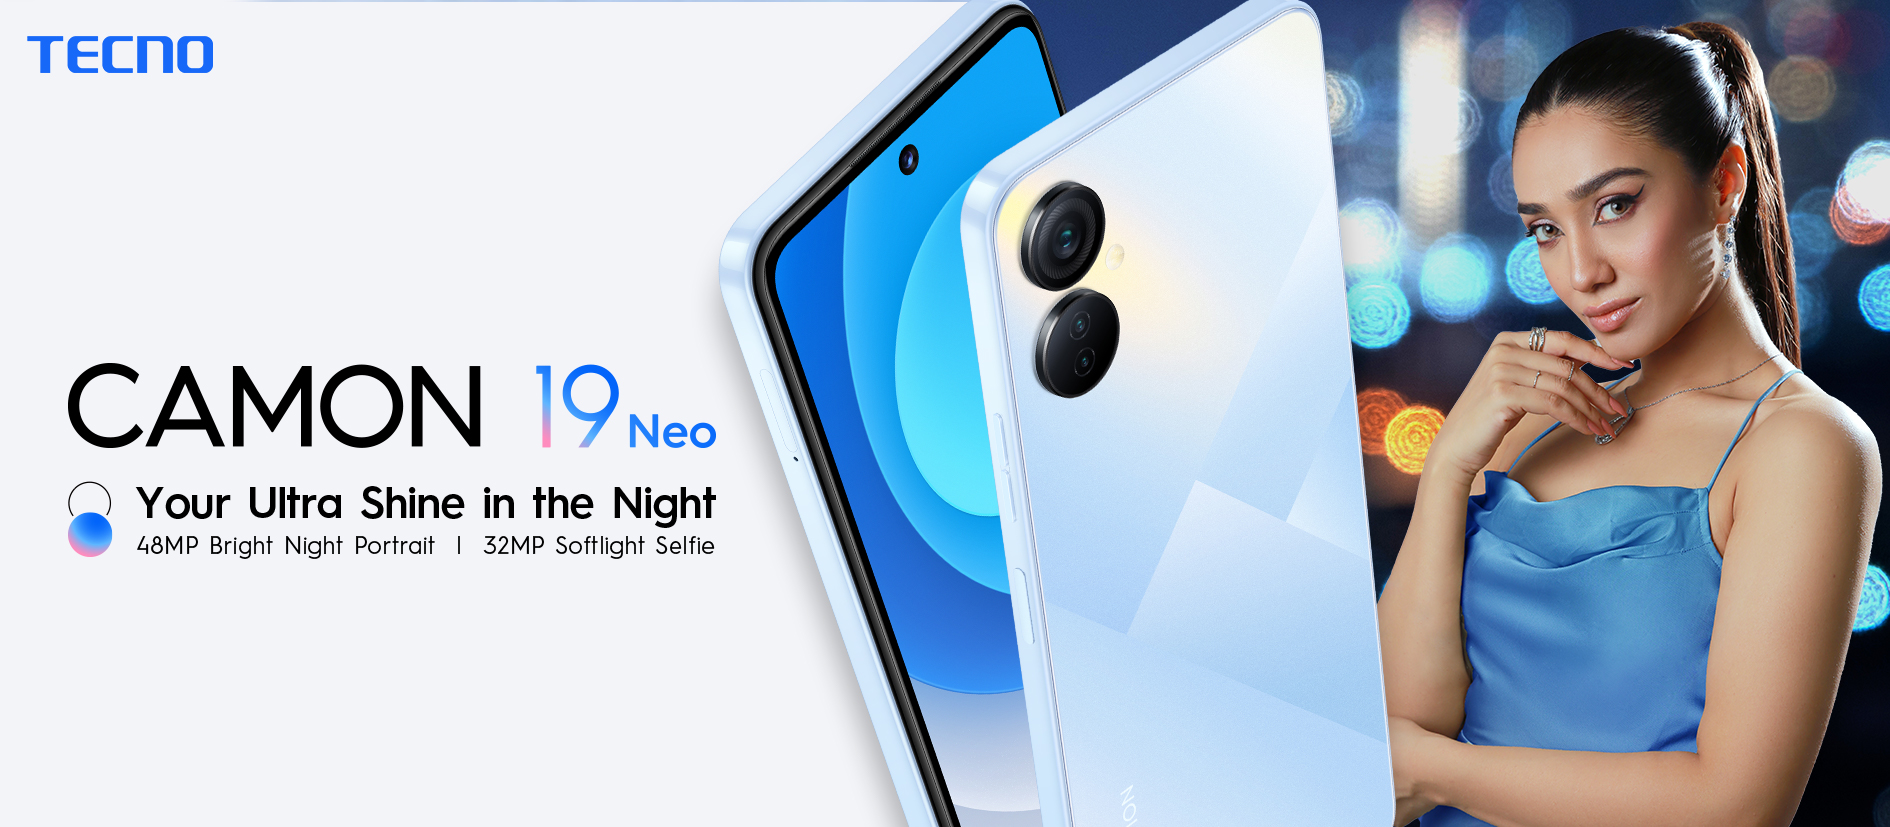 Camon 19 Neo &#8211; A must-buy Smartphone with all that you need